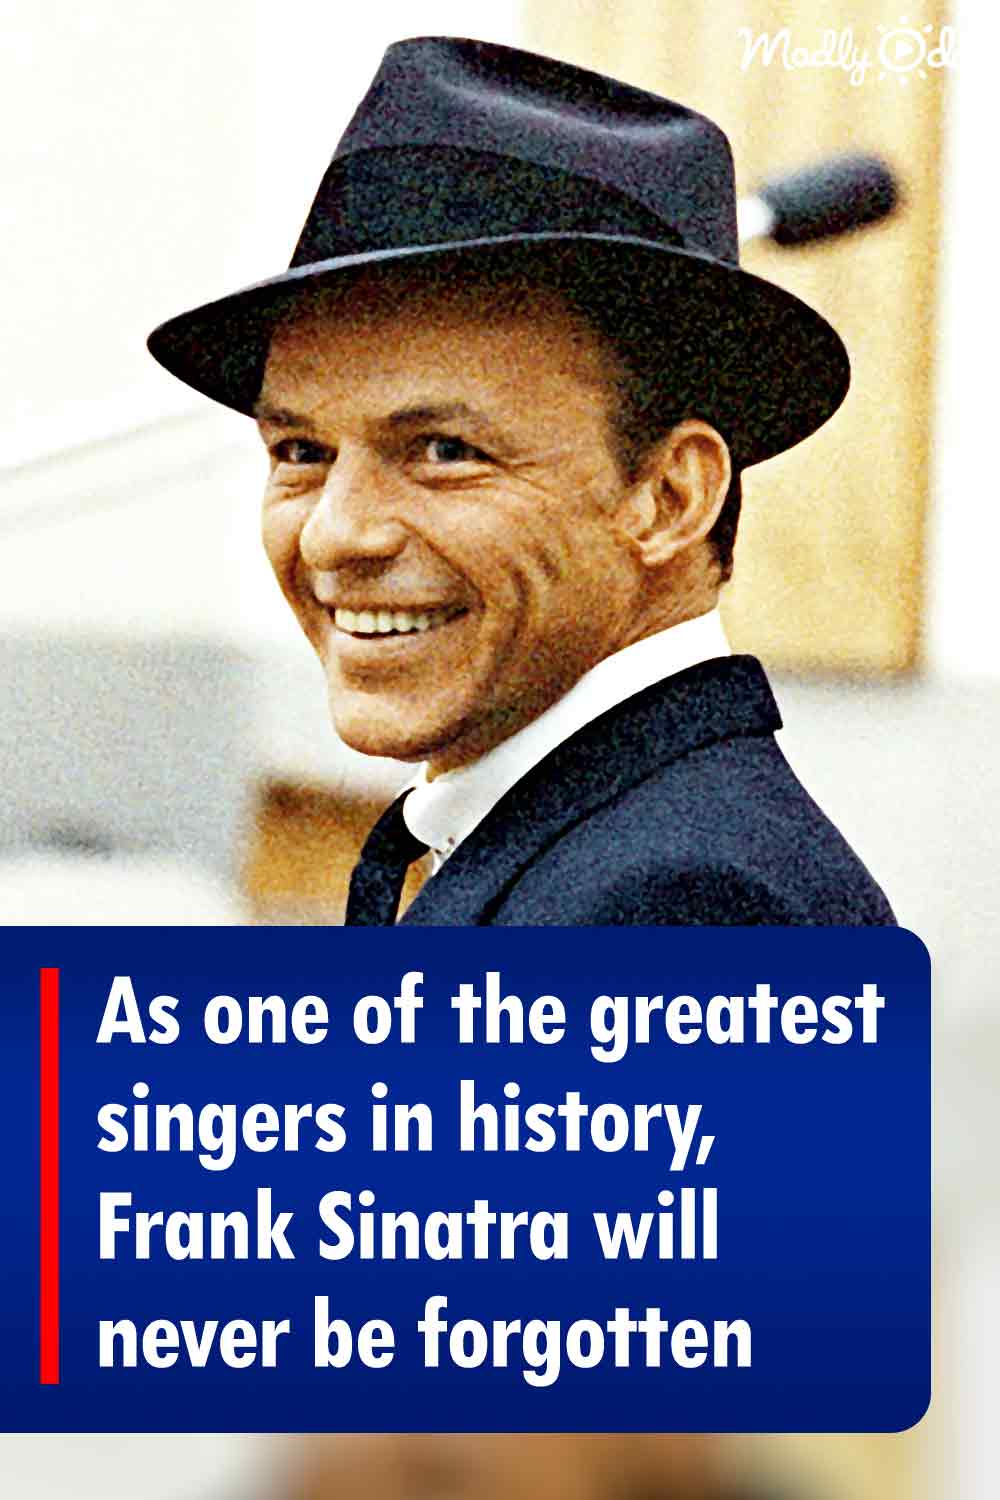 As one of the greatest singers in history, Frank Sinatra will never be forgotten